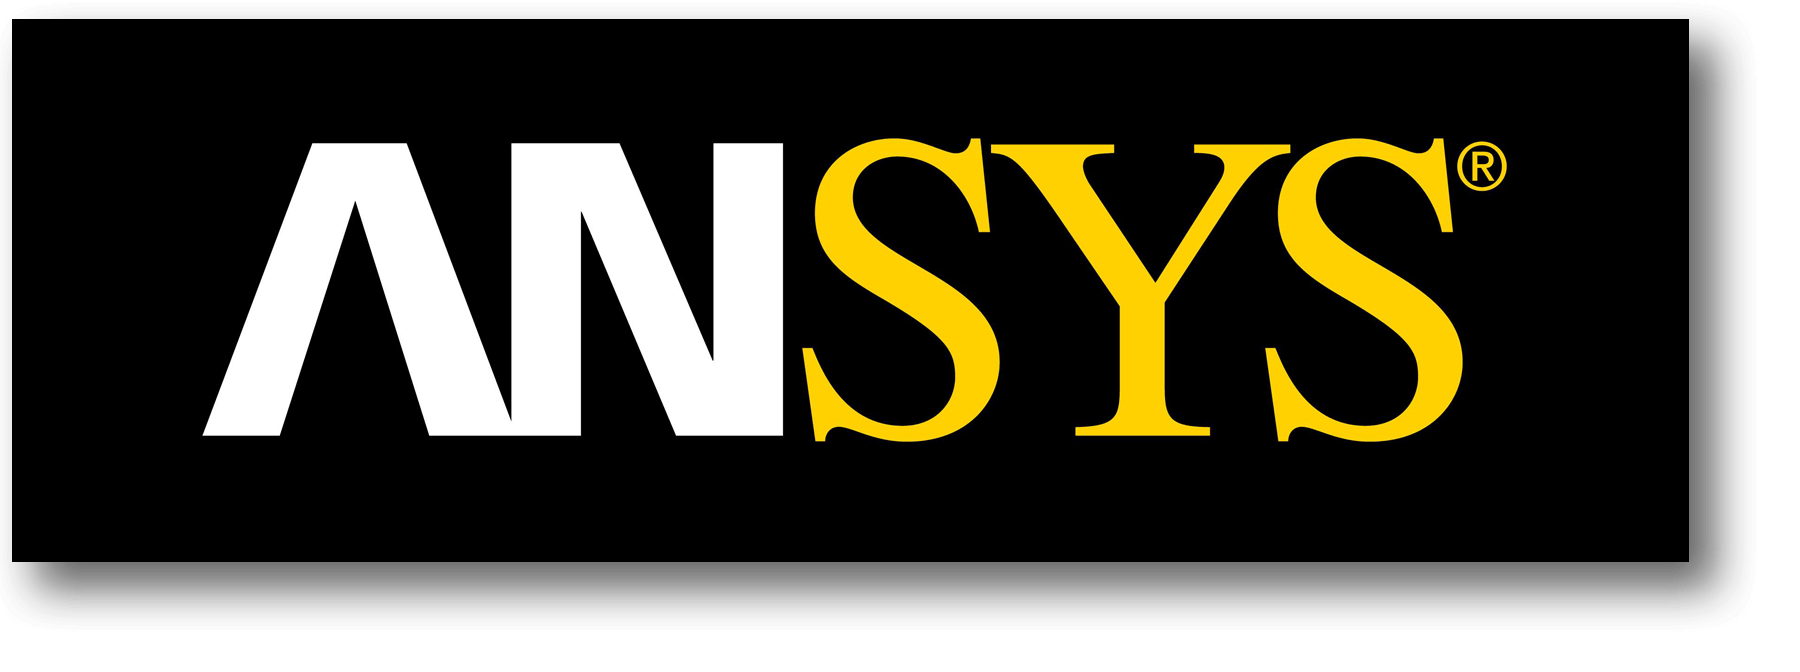 Ansys-logo.png